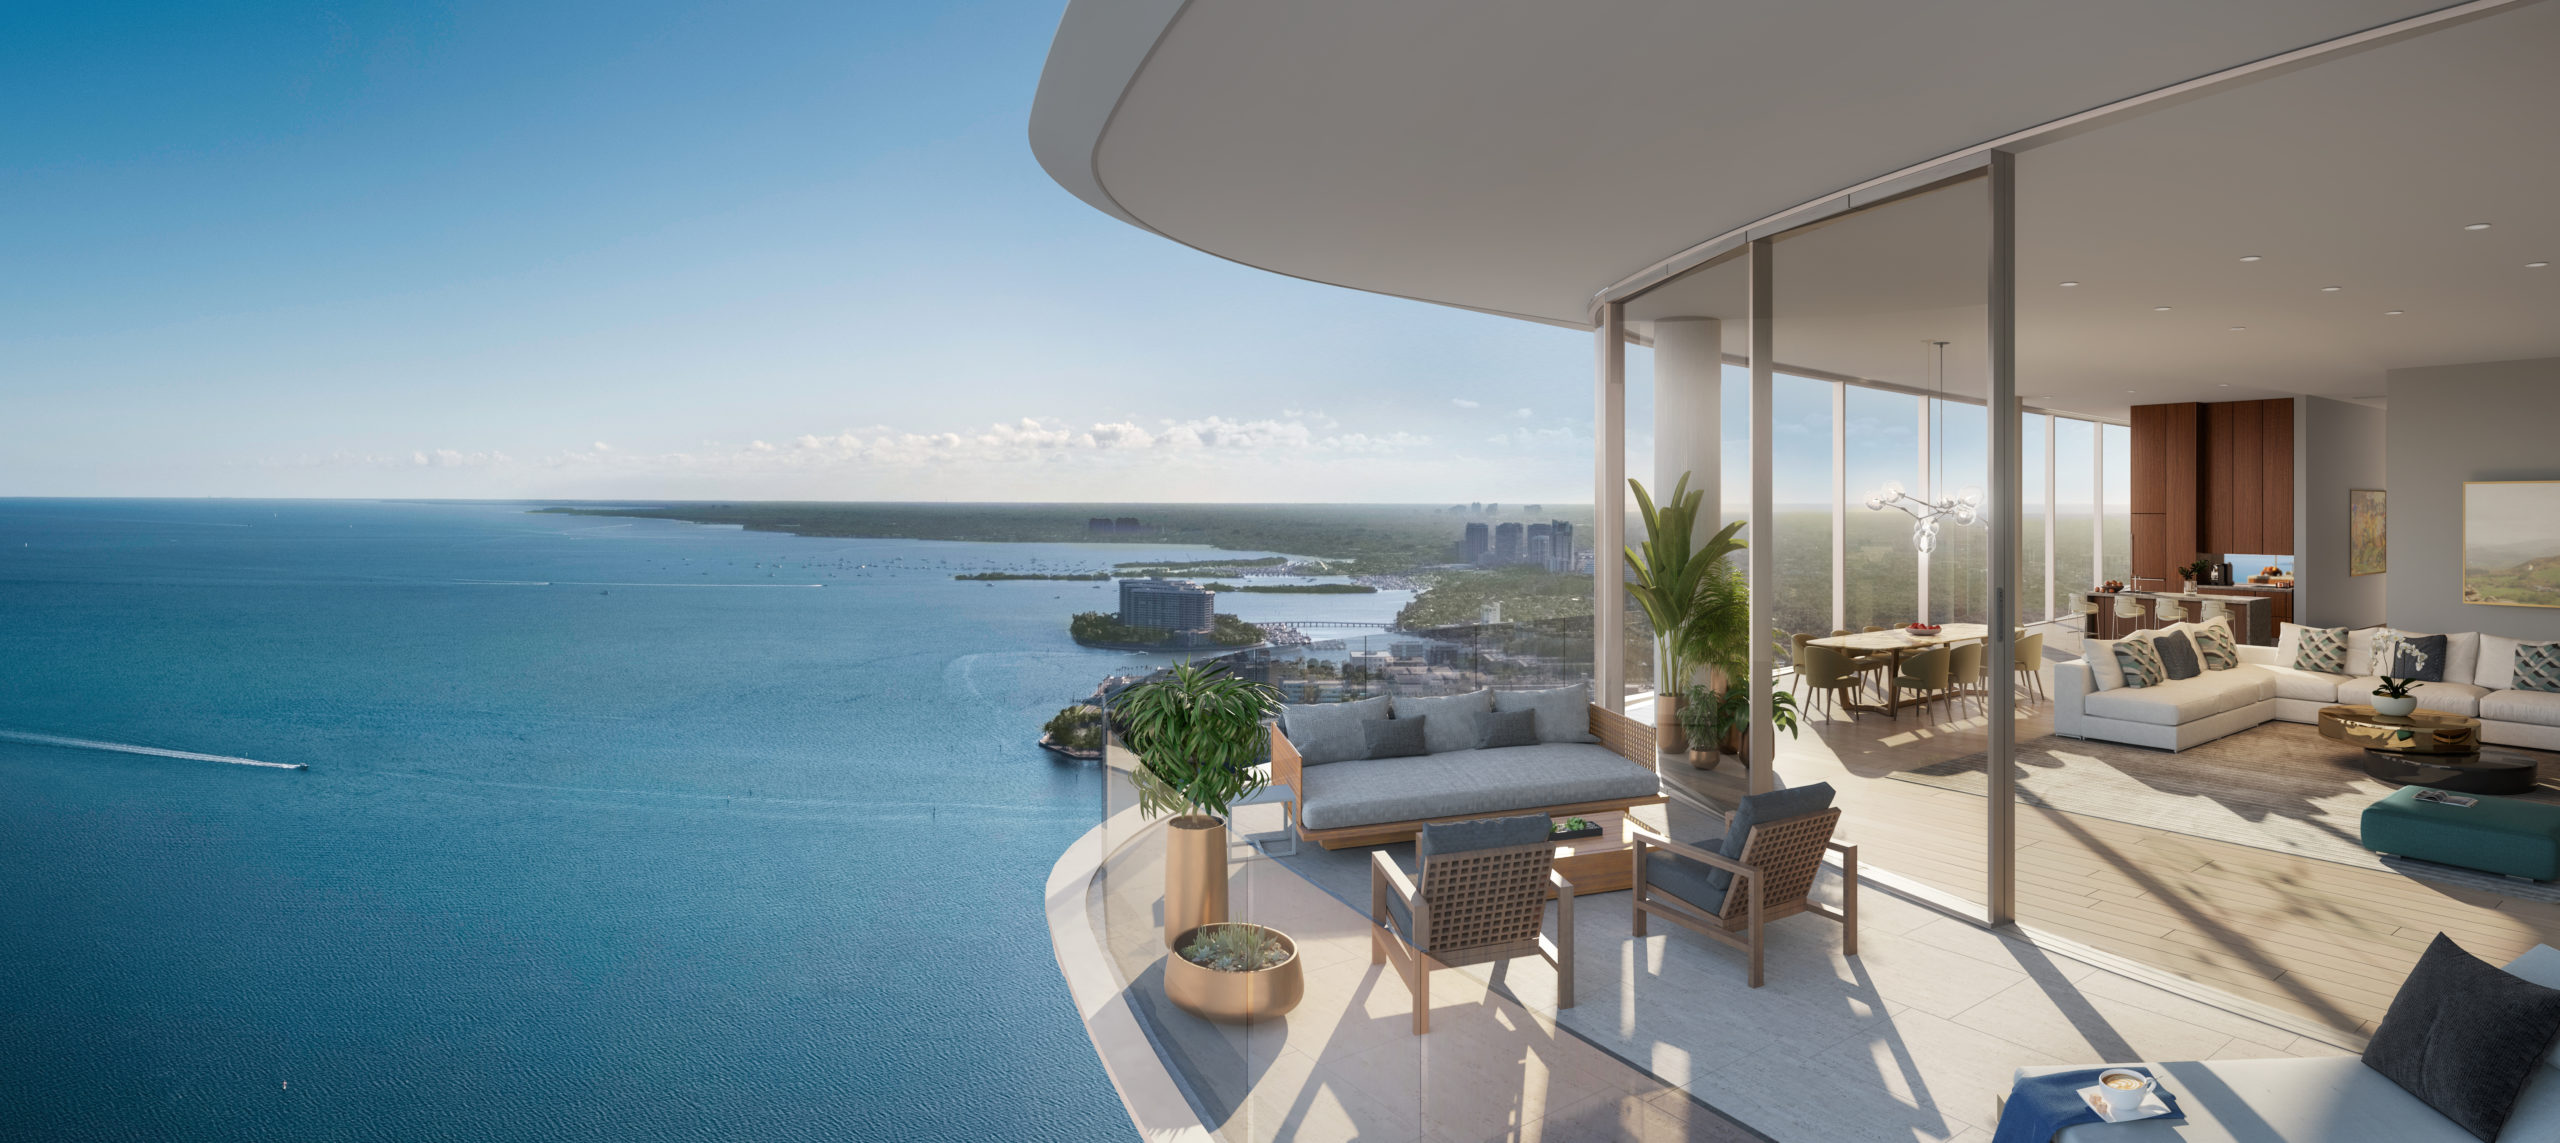 Exterior view of balcony overlooking the bay at Una Residences in Miami. Covered balcony with seating and potted plants.